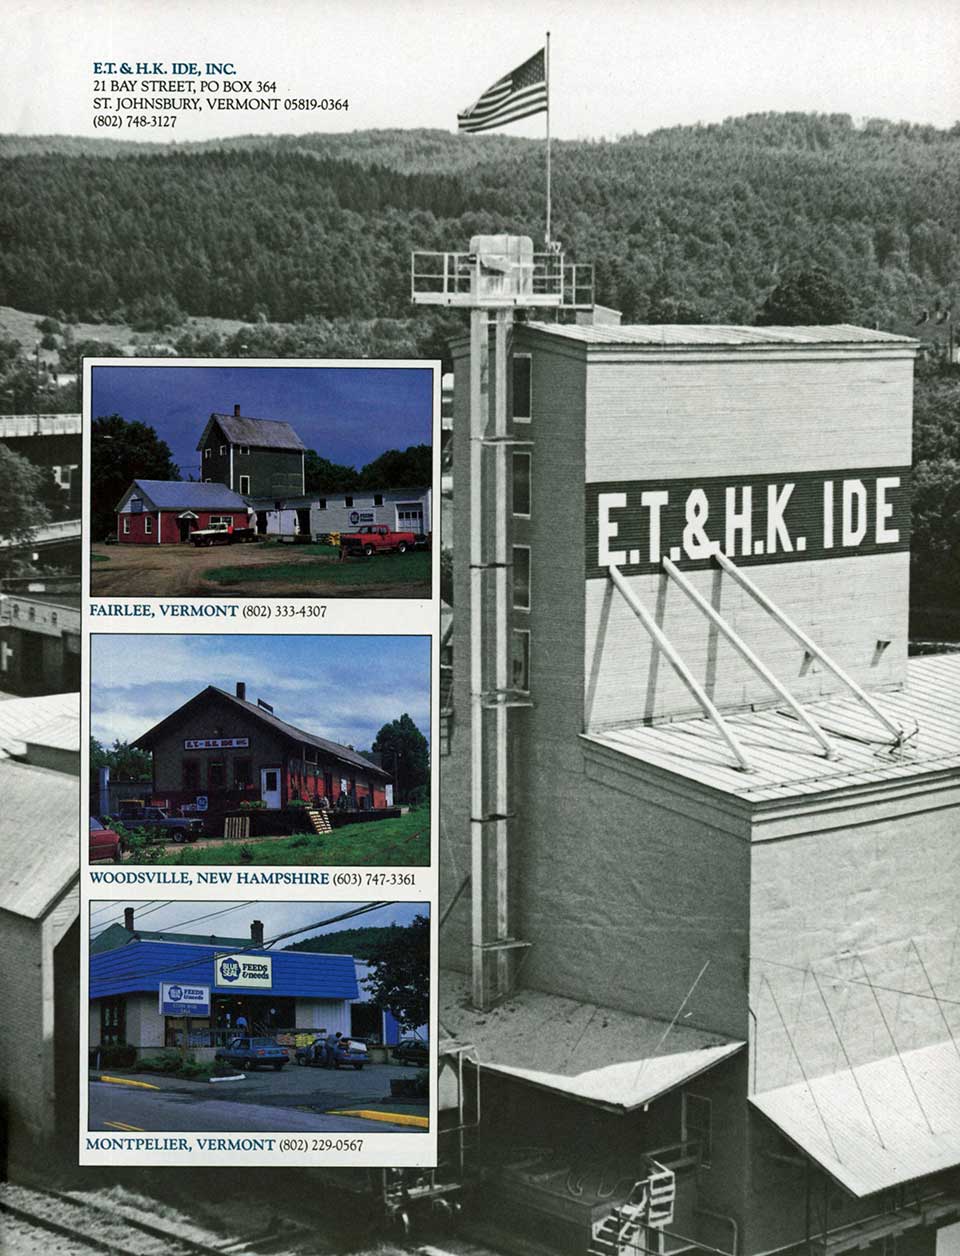 Photos of the Ide stores in 1988